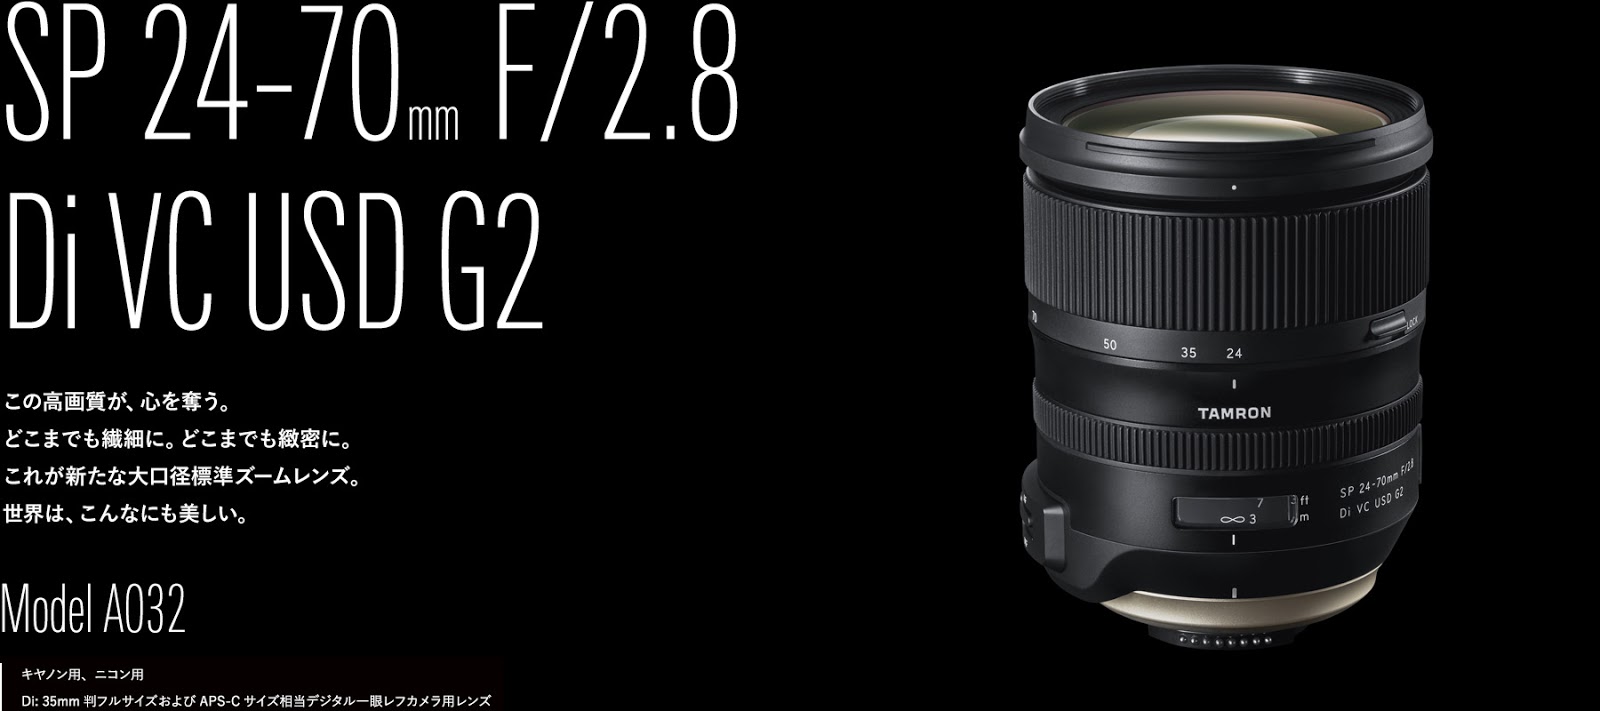 TAMRON SP24-70mm F/2.8 Di VC USD G2 | Photo of the Life